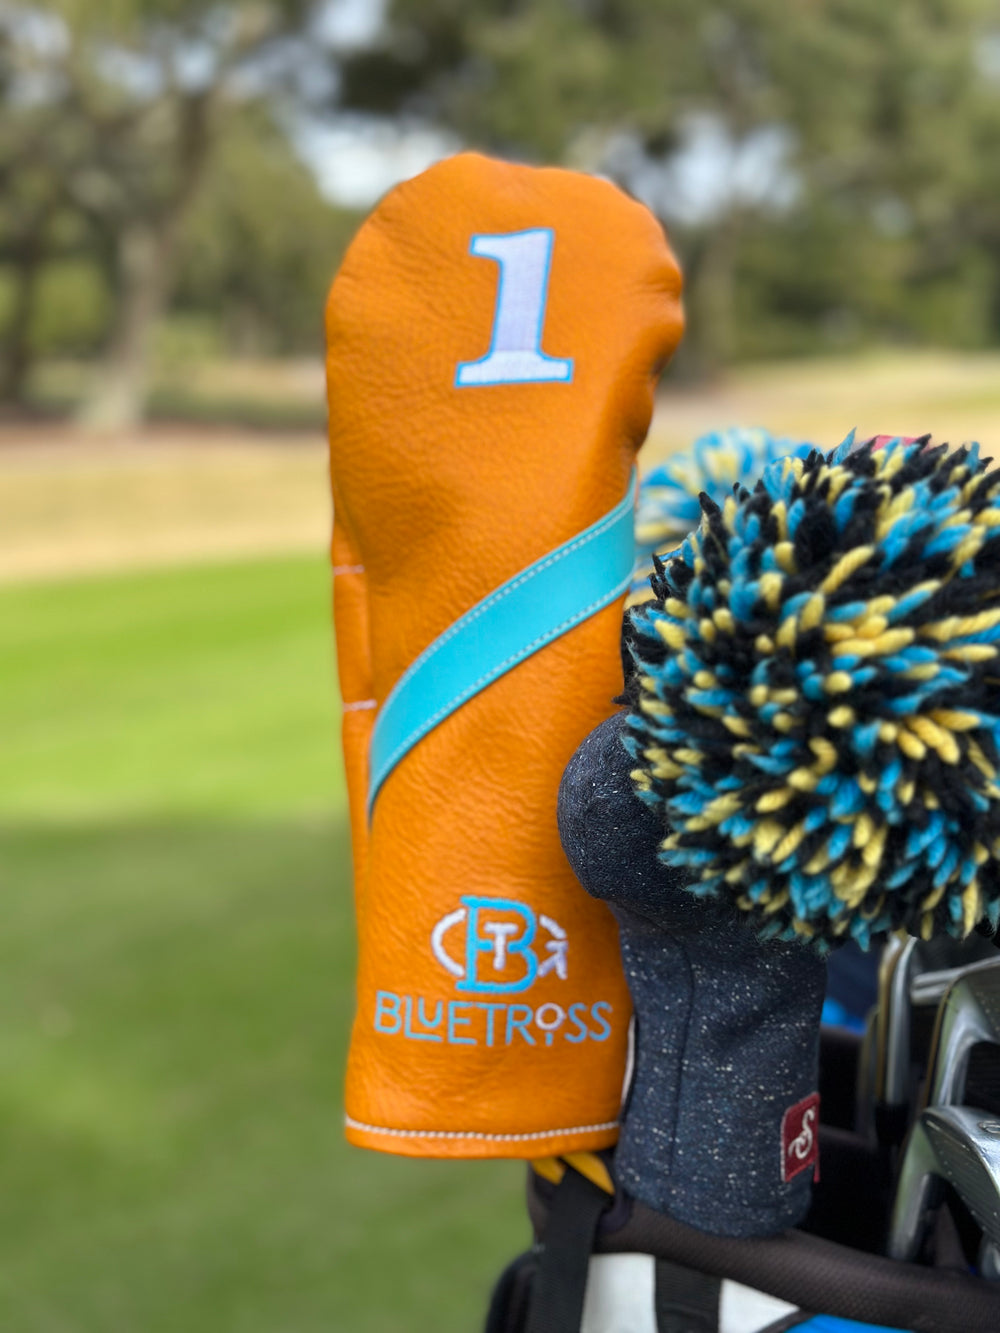 Yellow Headcover with blue strip on golf club on golf course